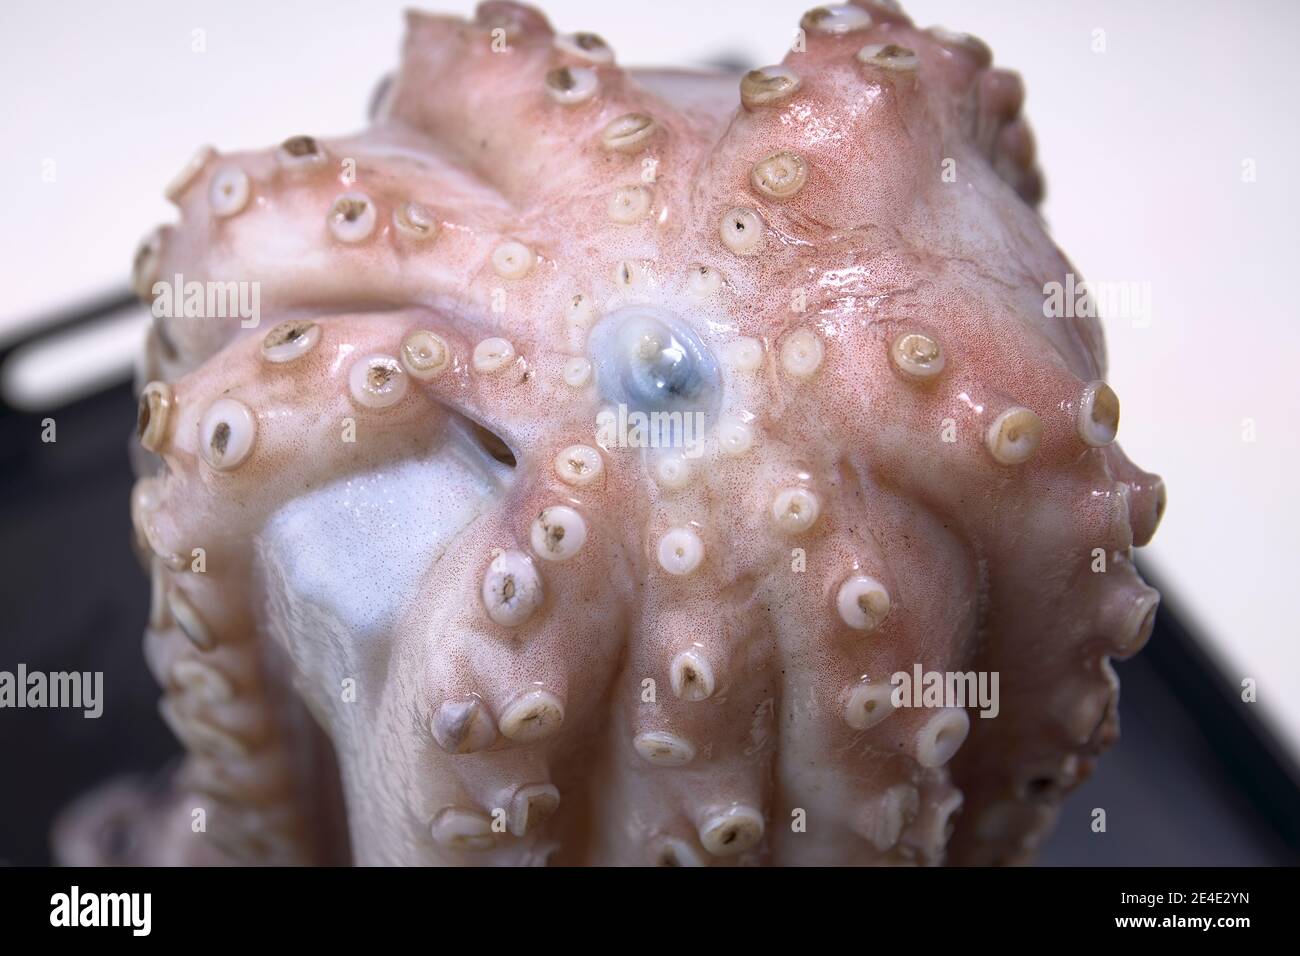 Octopus from the estuaries of Galicia, in northwestern Spain Stock Photo